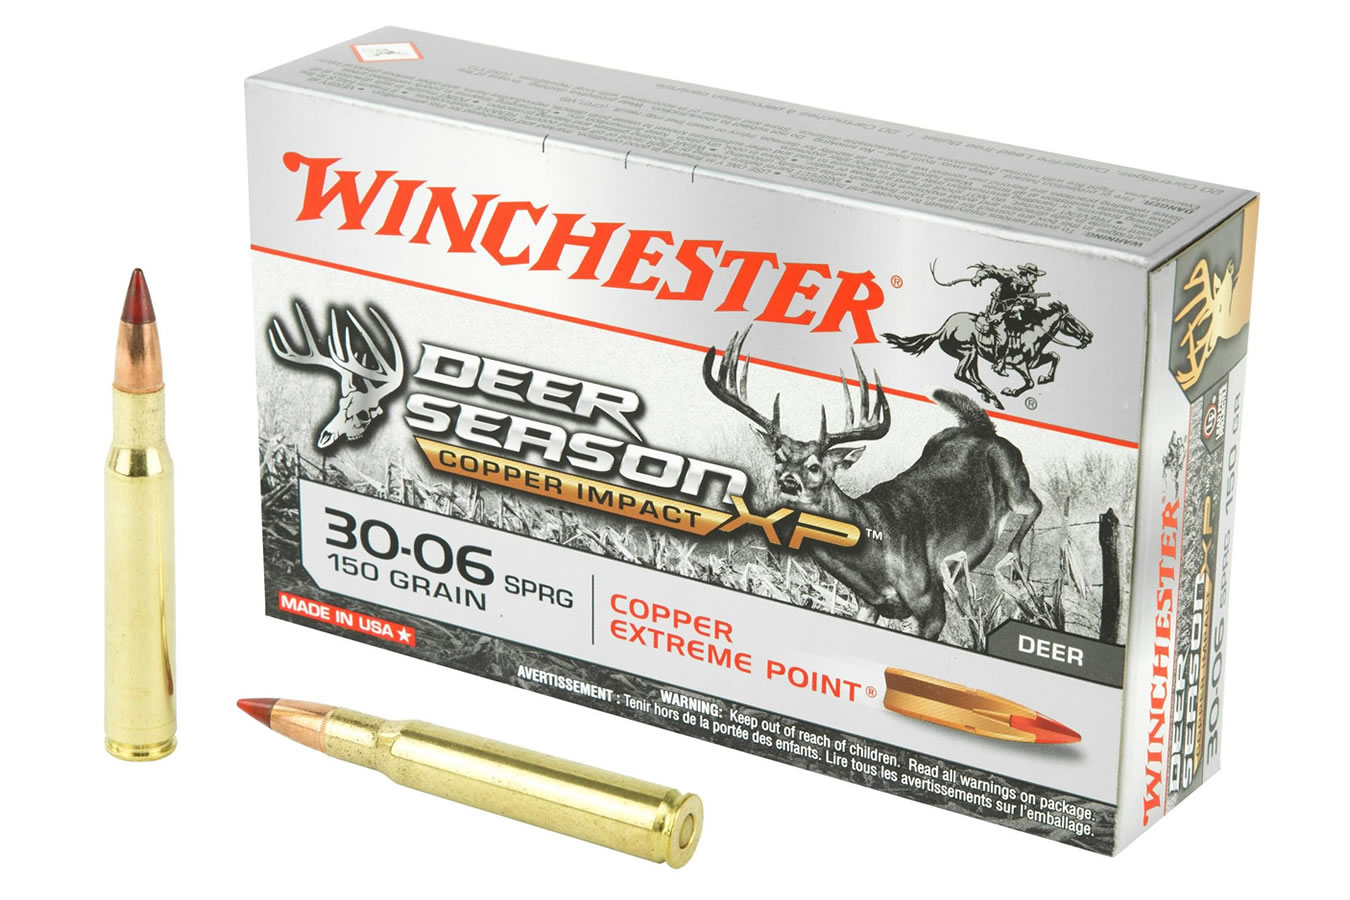 WINCHESTER AMMO 30-06 SPRG 150 GR COPPER EXTREME POINT DEER SEASON XP 20/BOX20RD